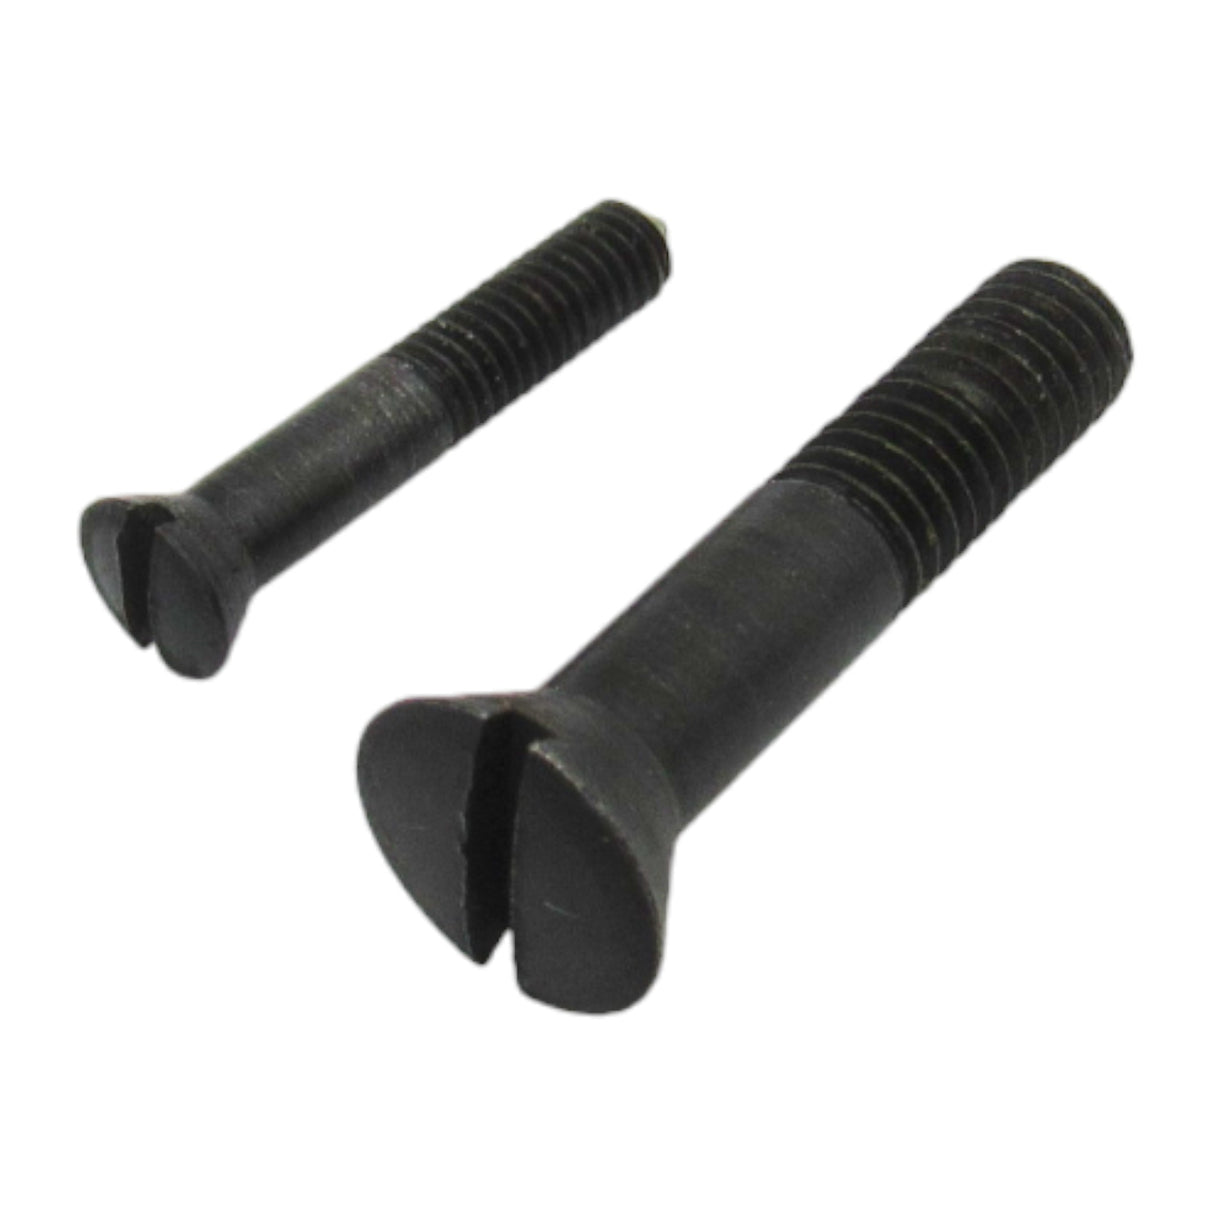 Top Cover Screws for Elna Model 62 Sewing Machine